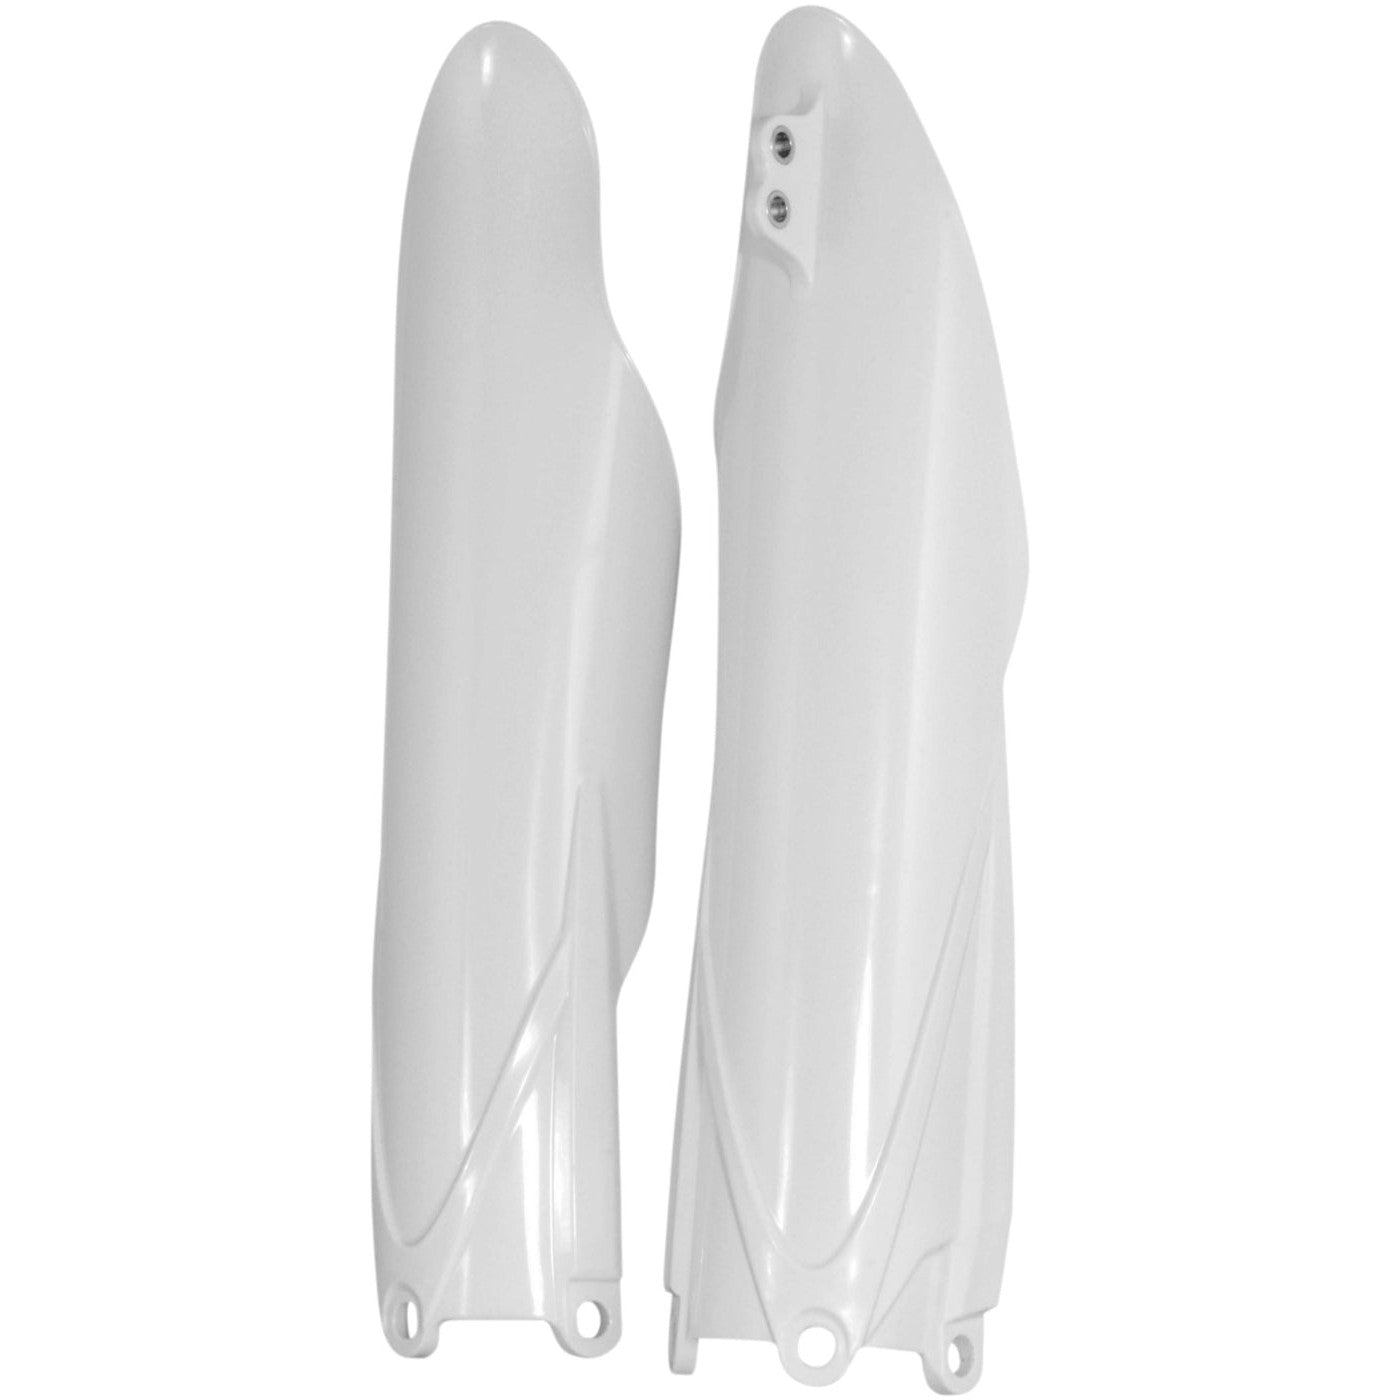 Acerbis White Fork Covers for Yamaha - 2171840002